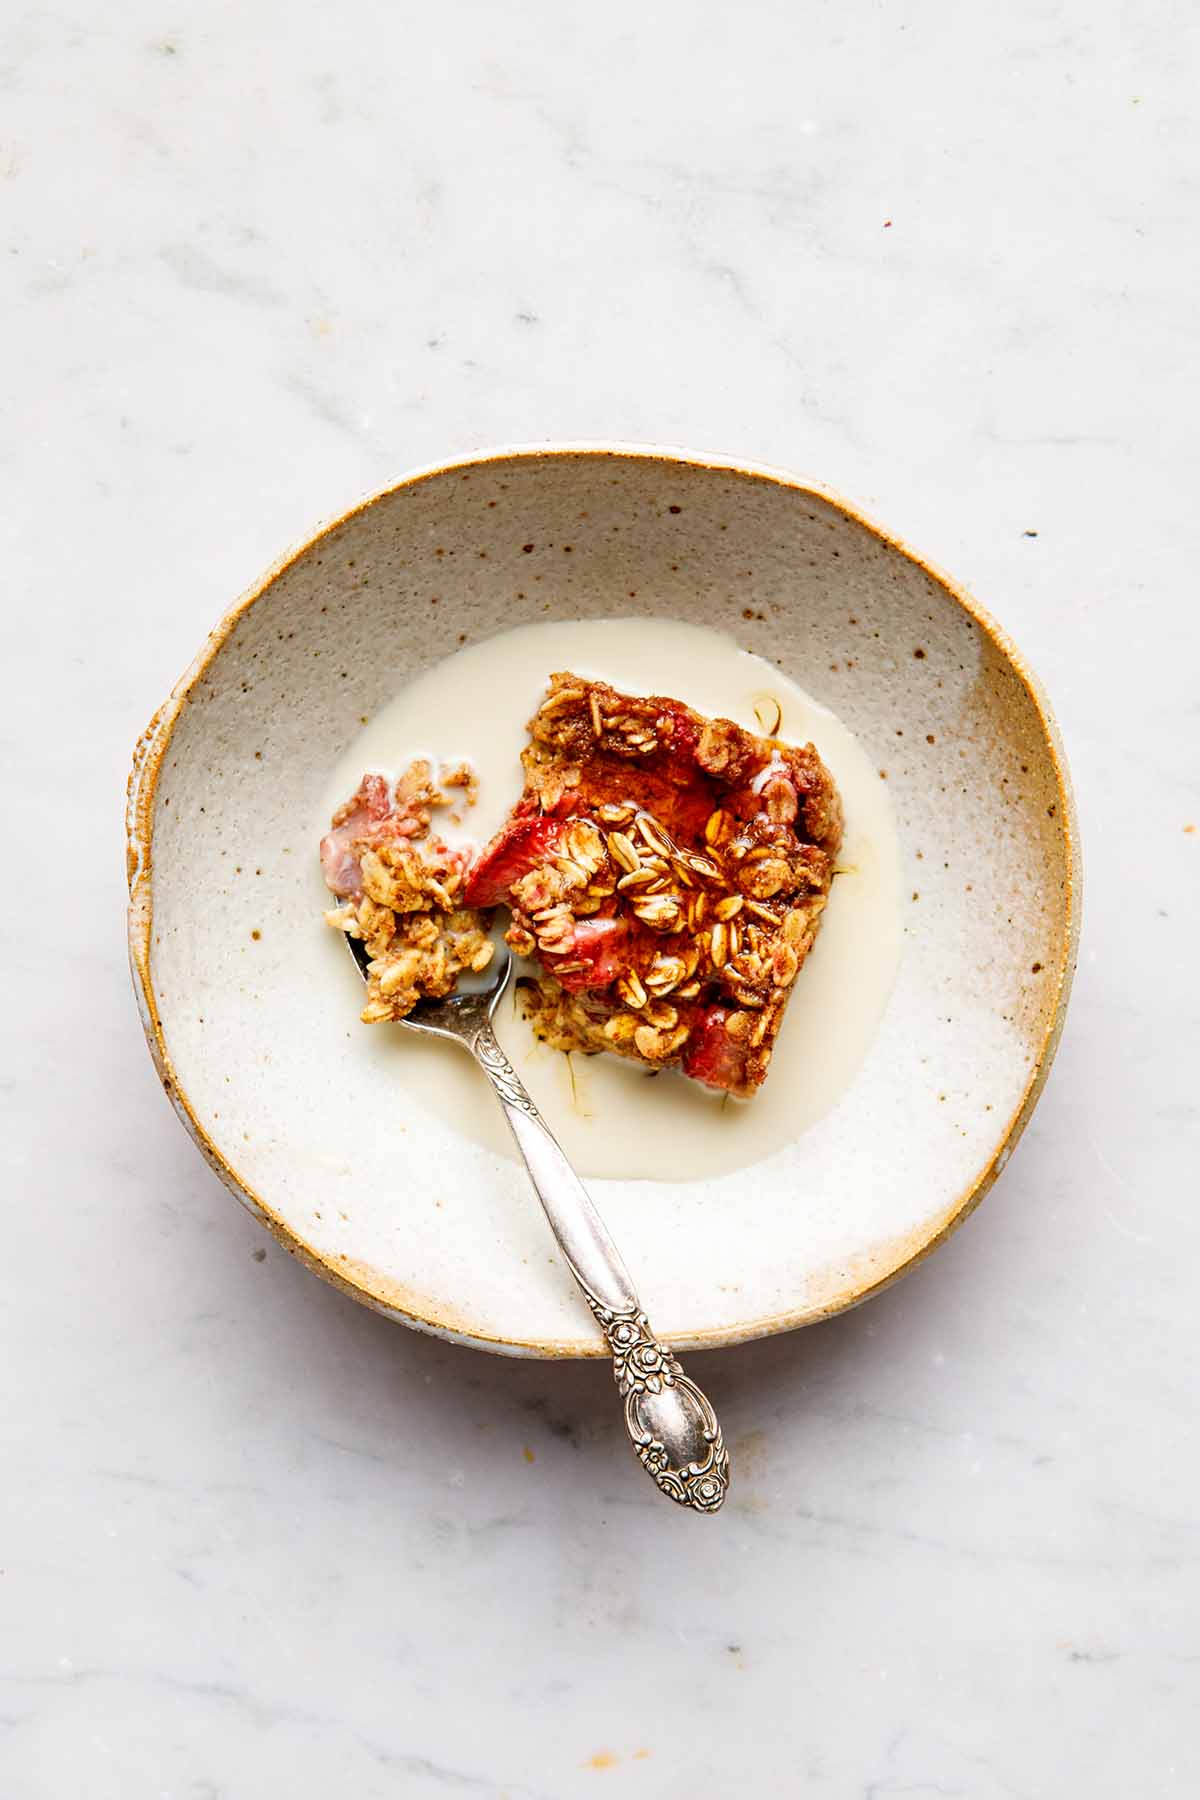 A serving of vegan strawberry baked oatmeal in a ceramic bowl on a marble surface.